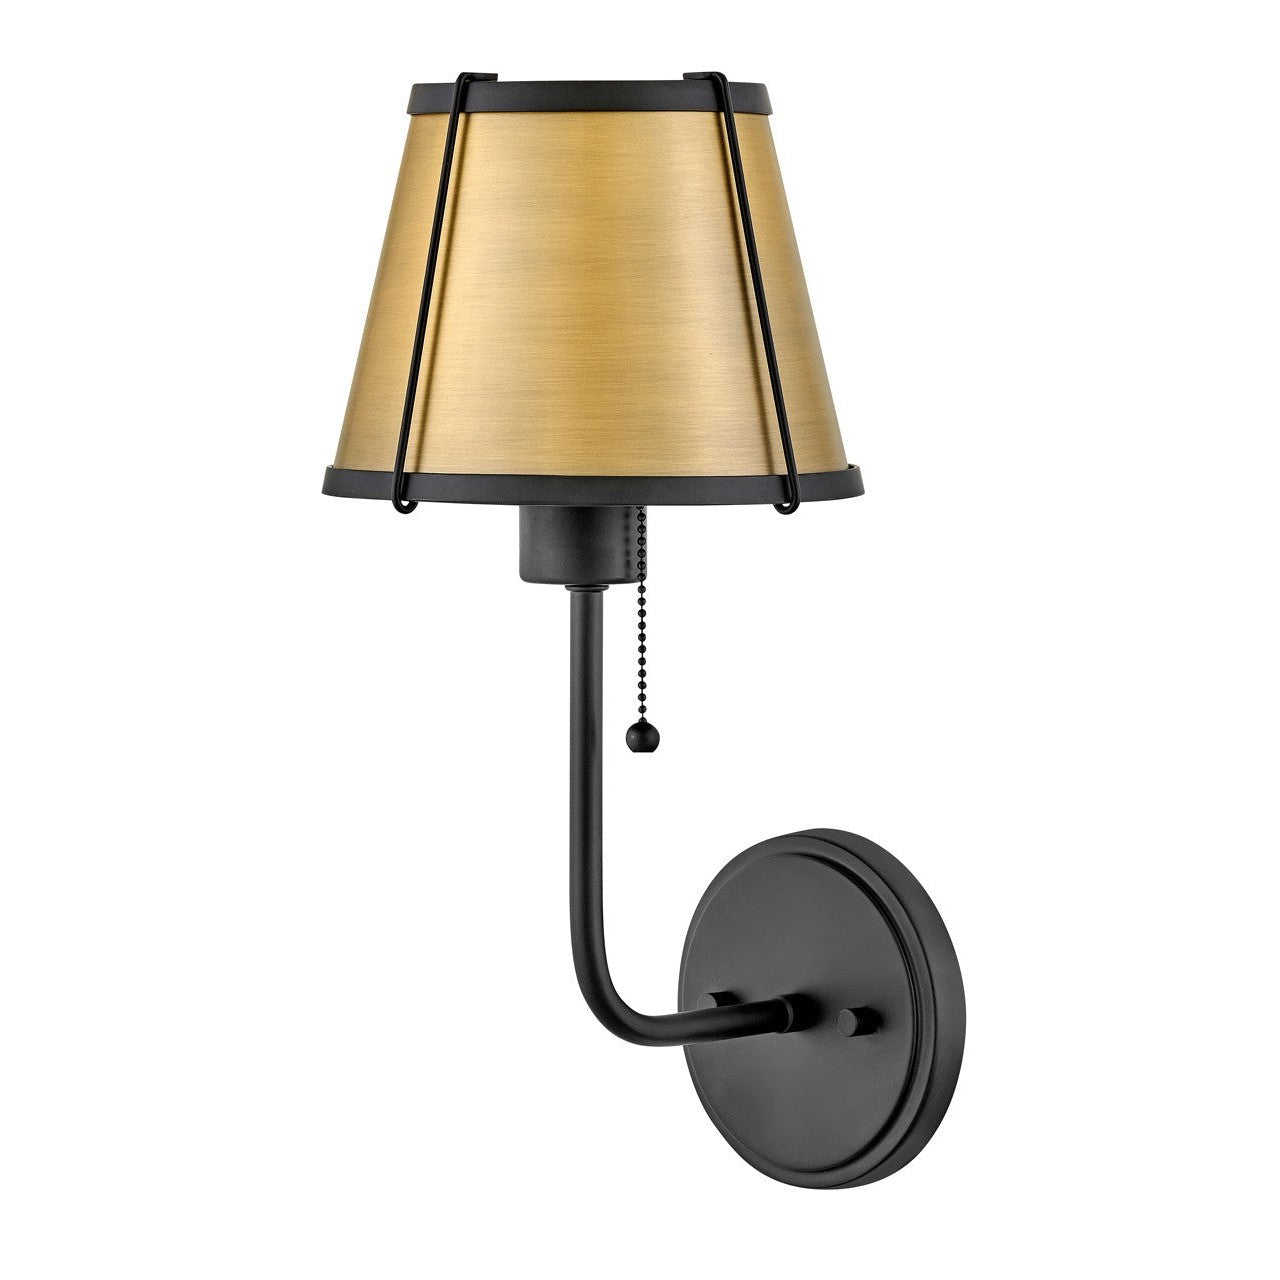 Hinkley Clarke 4890BK-LDB Wall Sconce Light - Black with Lacquered Dark Brass accents